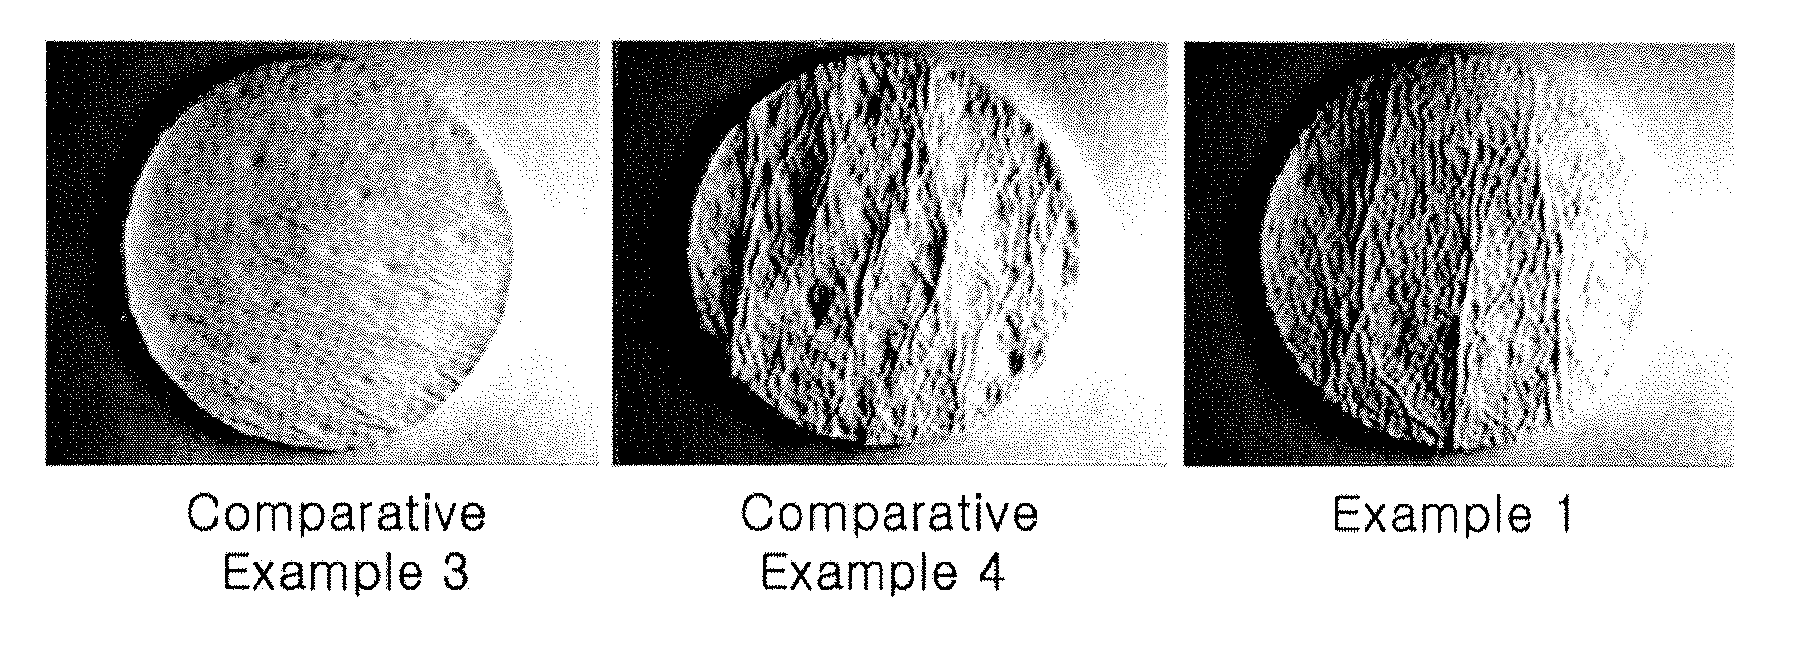 Composition containing collagen peptide for improving skin care